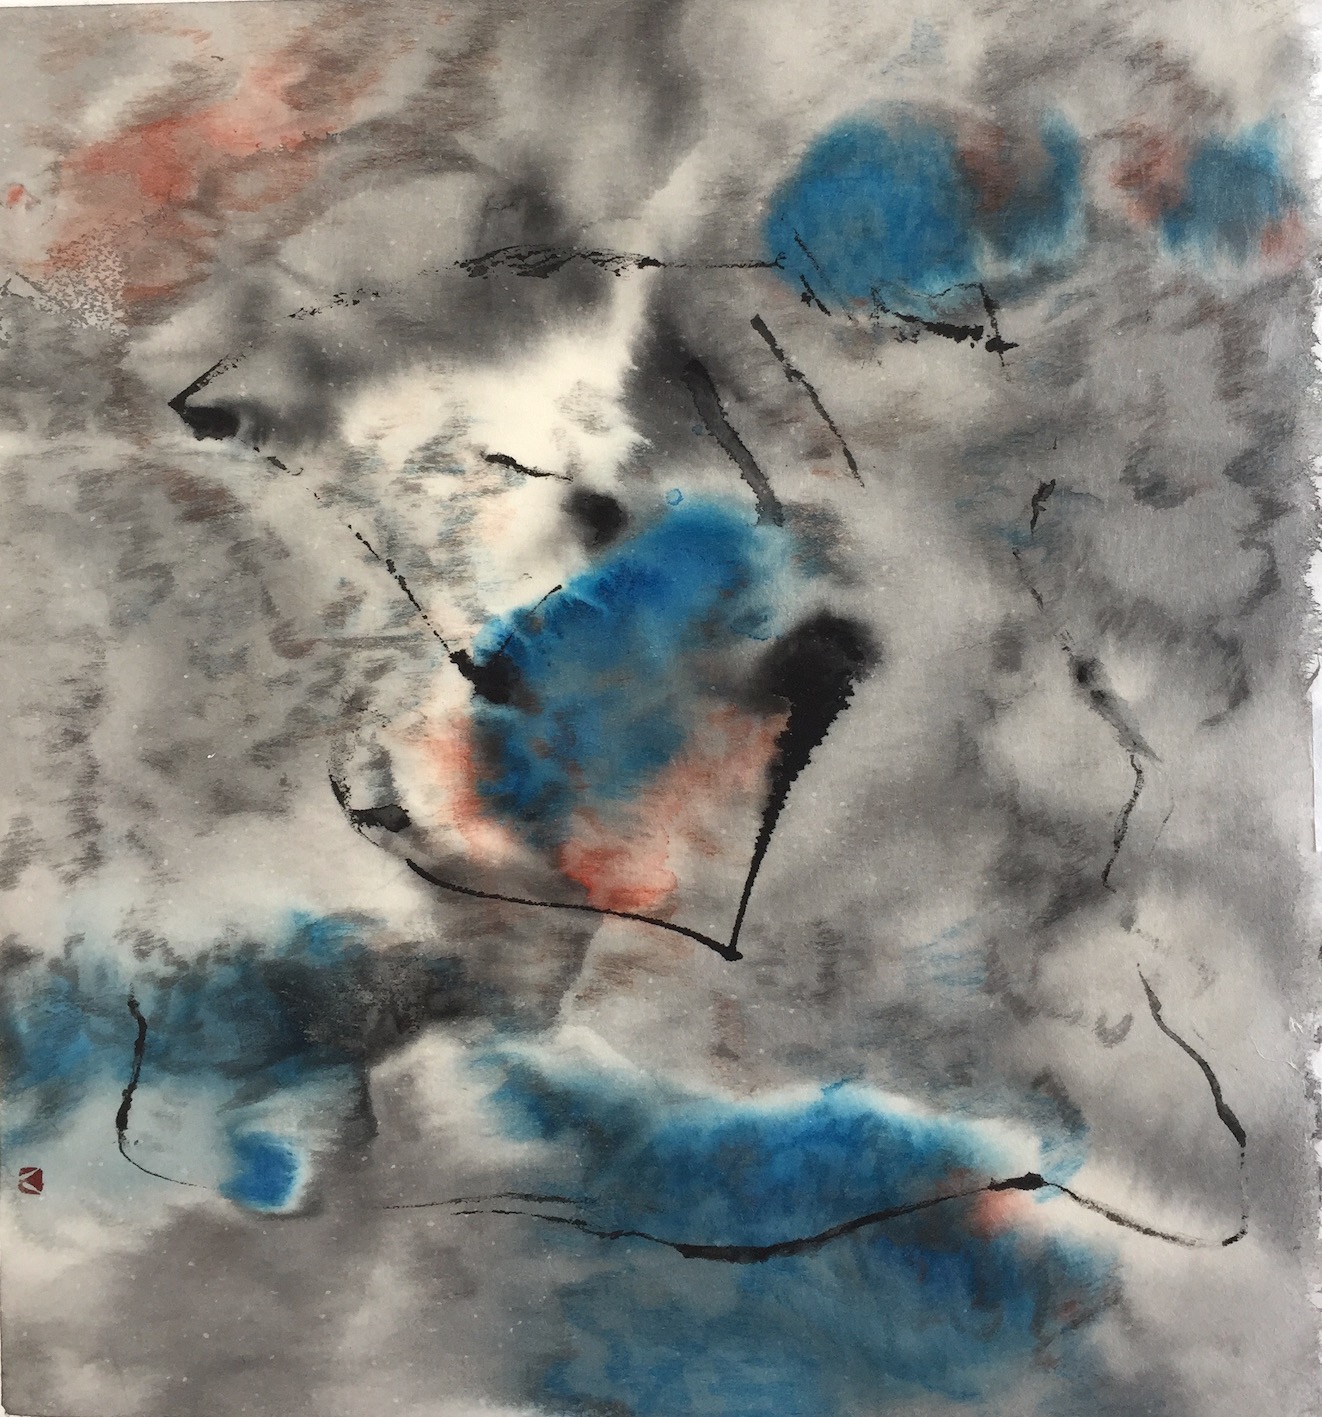 Clouds Dancing 5 24 X 25 cms Sumi ink, acrylic, 踊る雲 5 墨、アクリル　　2020